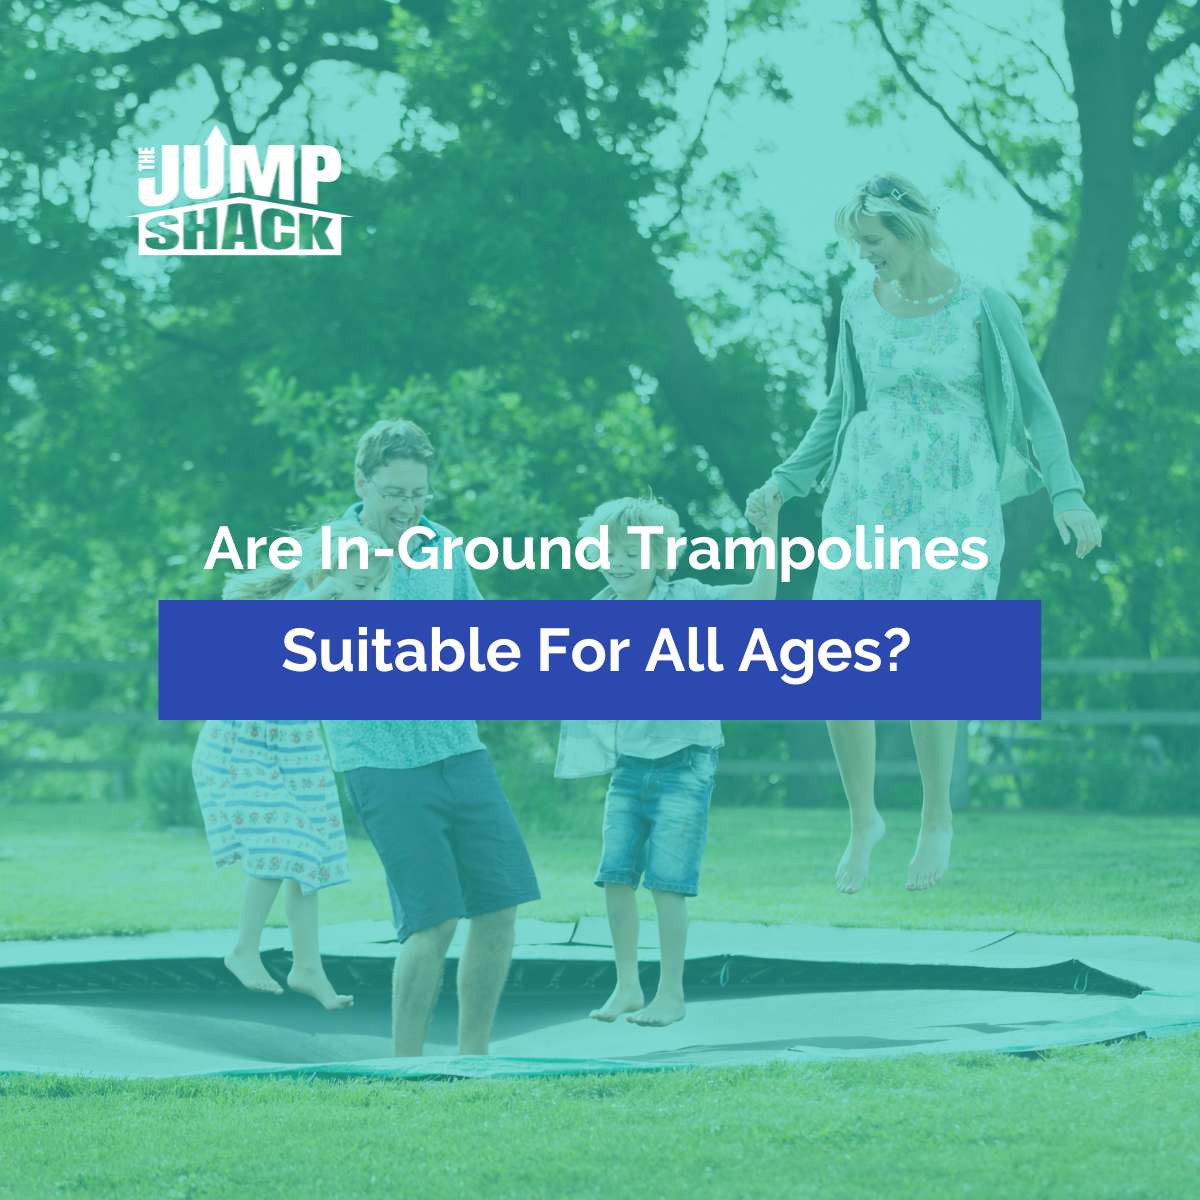 Are In-Ground Trampolines Suitable For All Ages